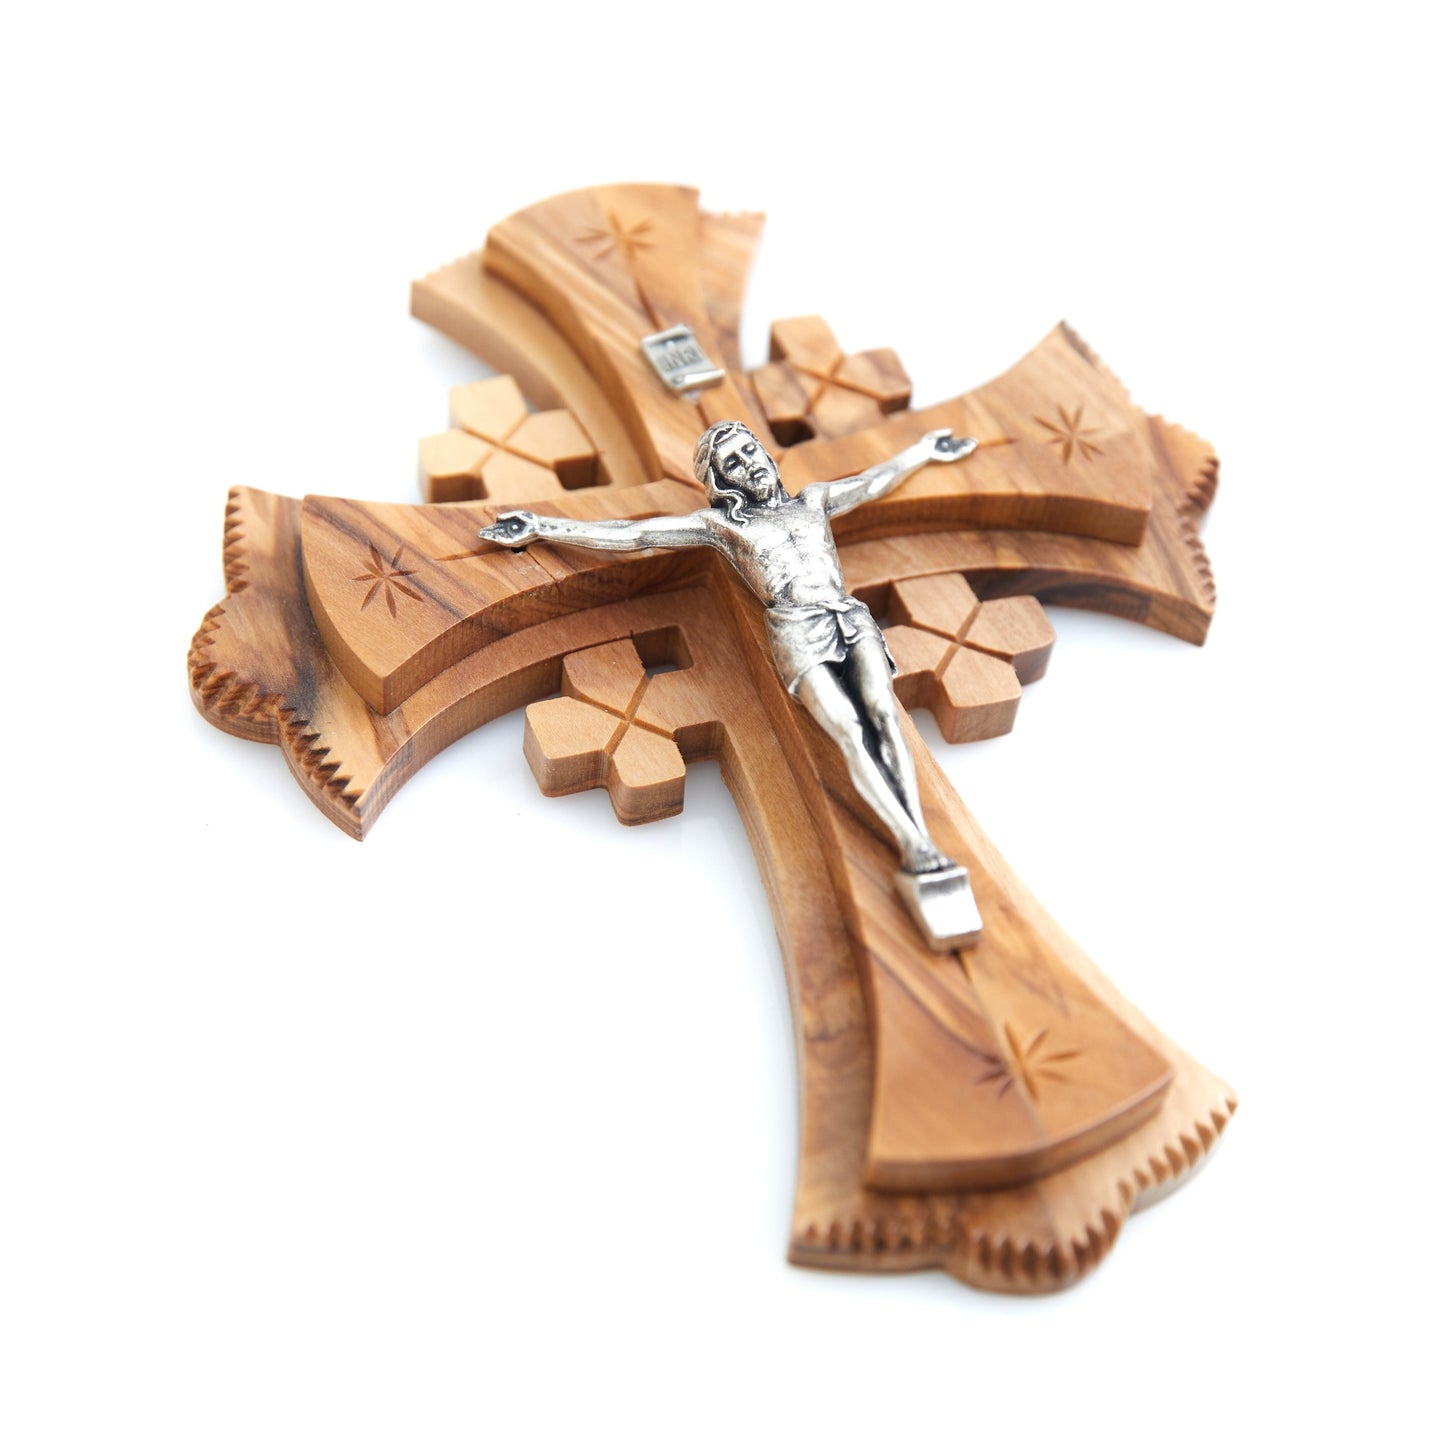 7" Crucifix with "Jerusalem" Engraved on Back, Wooden Hand Made